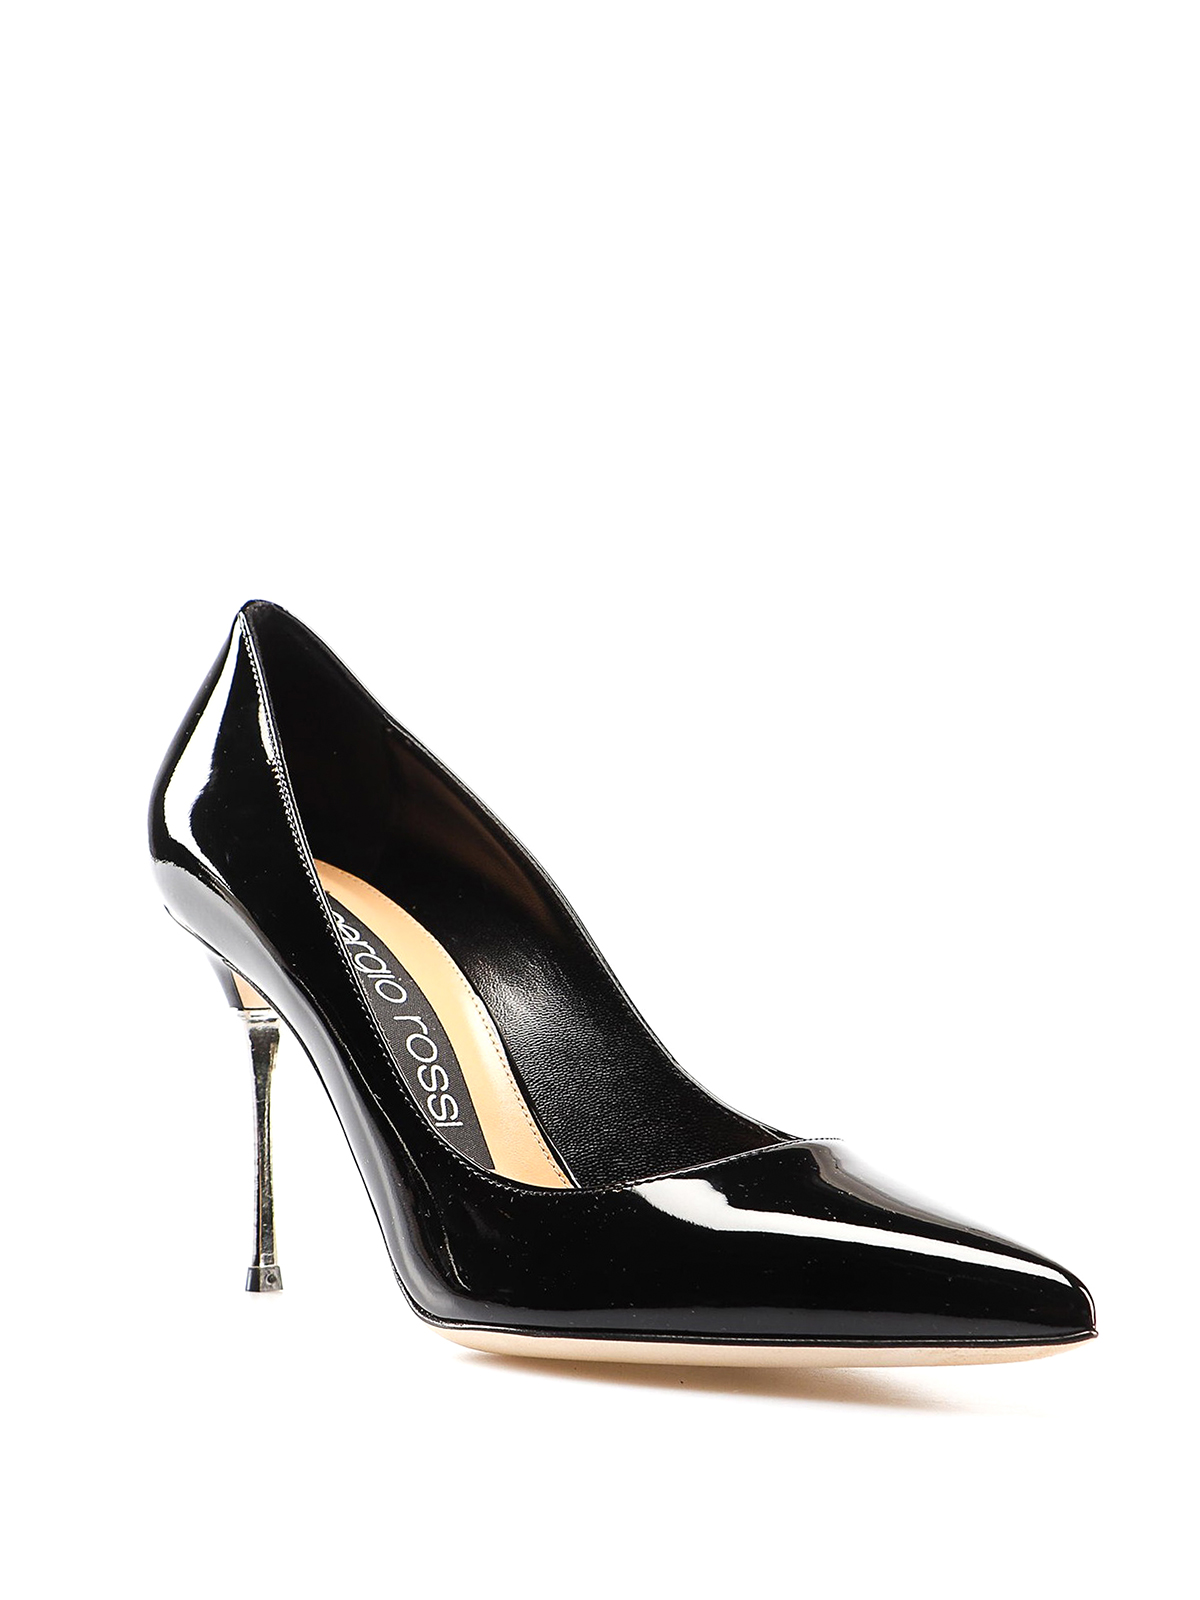 Court shoes Sergio Rossi - Black patent leather pumps 